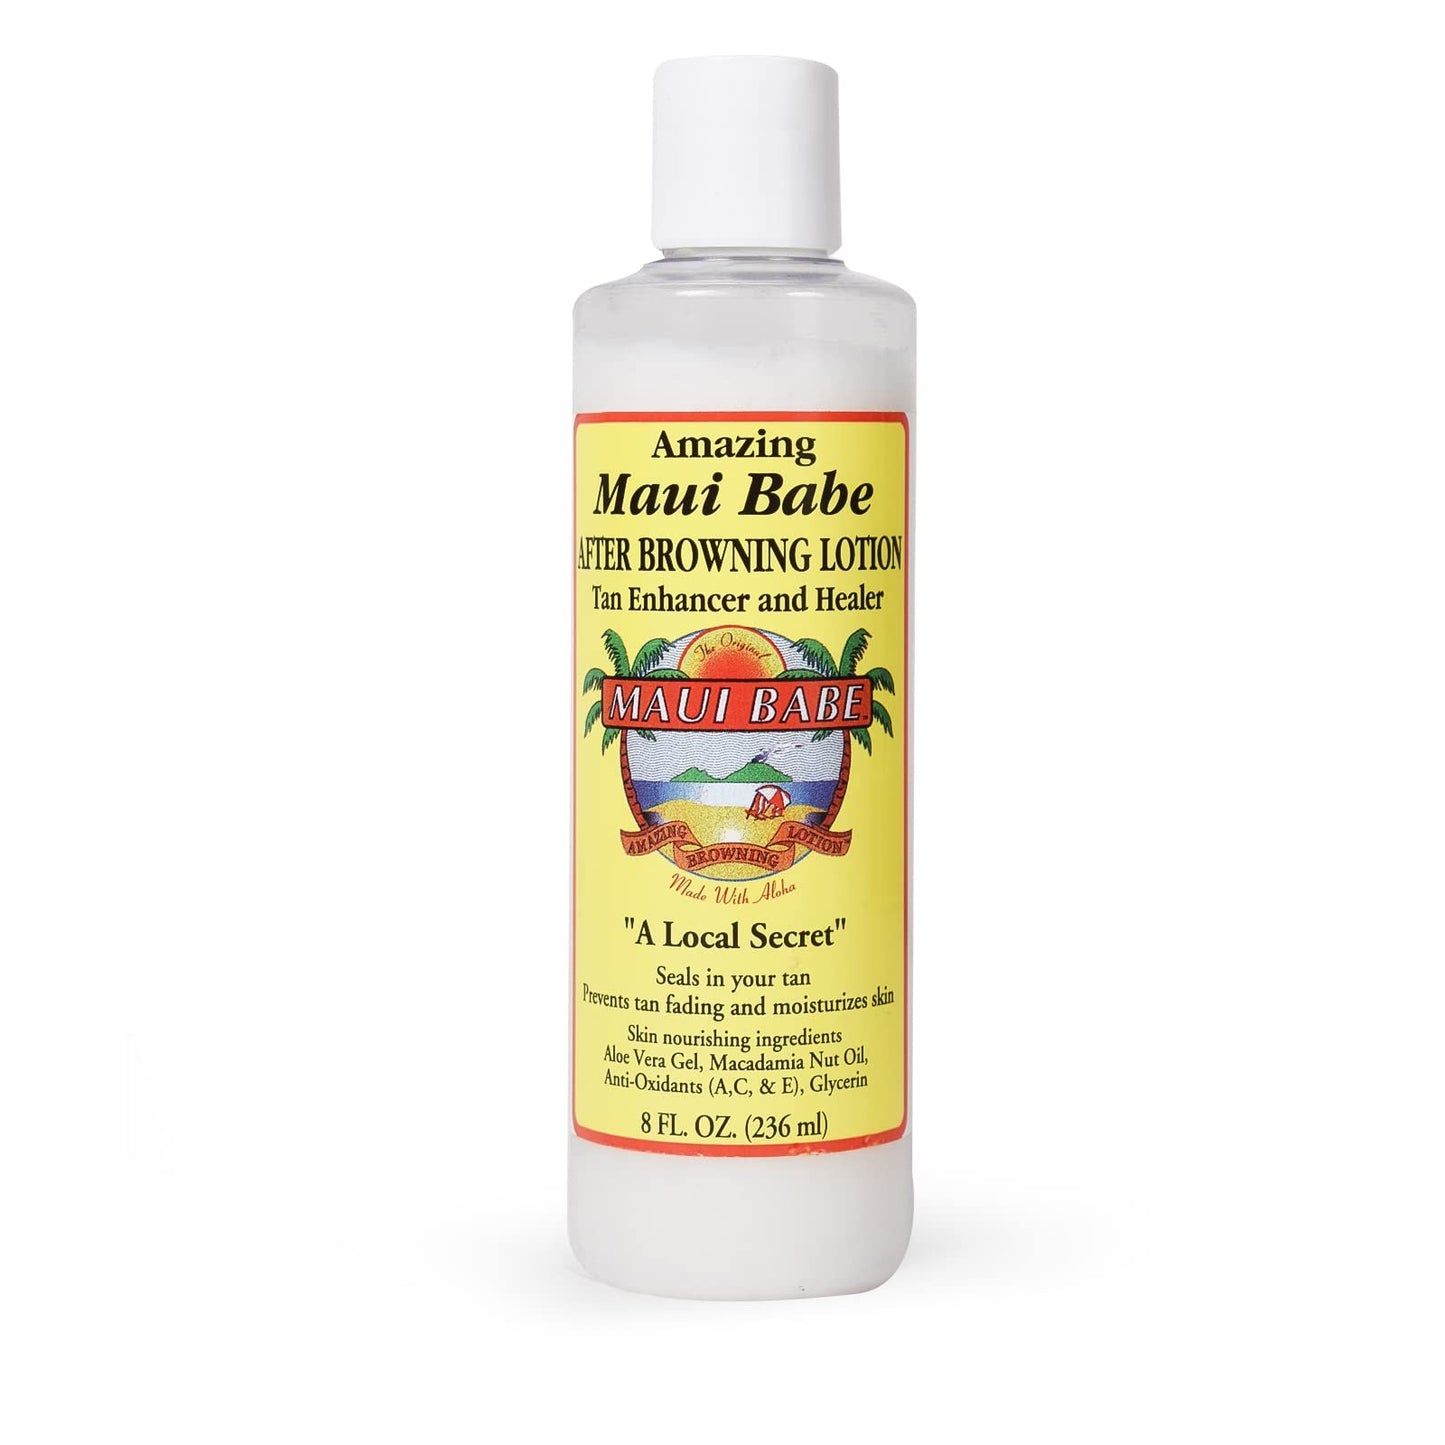 Maui Babe After Browning Tanning Lotion 8 oz